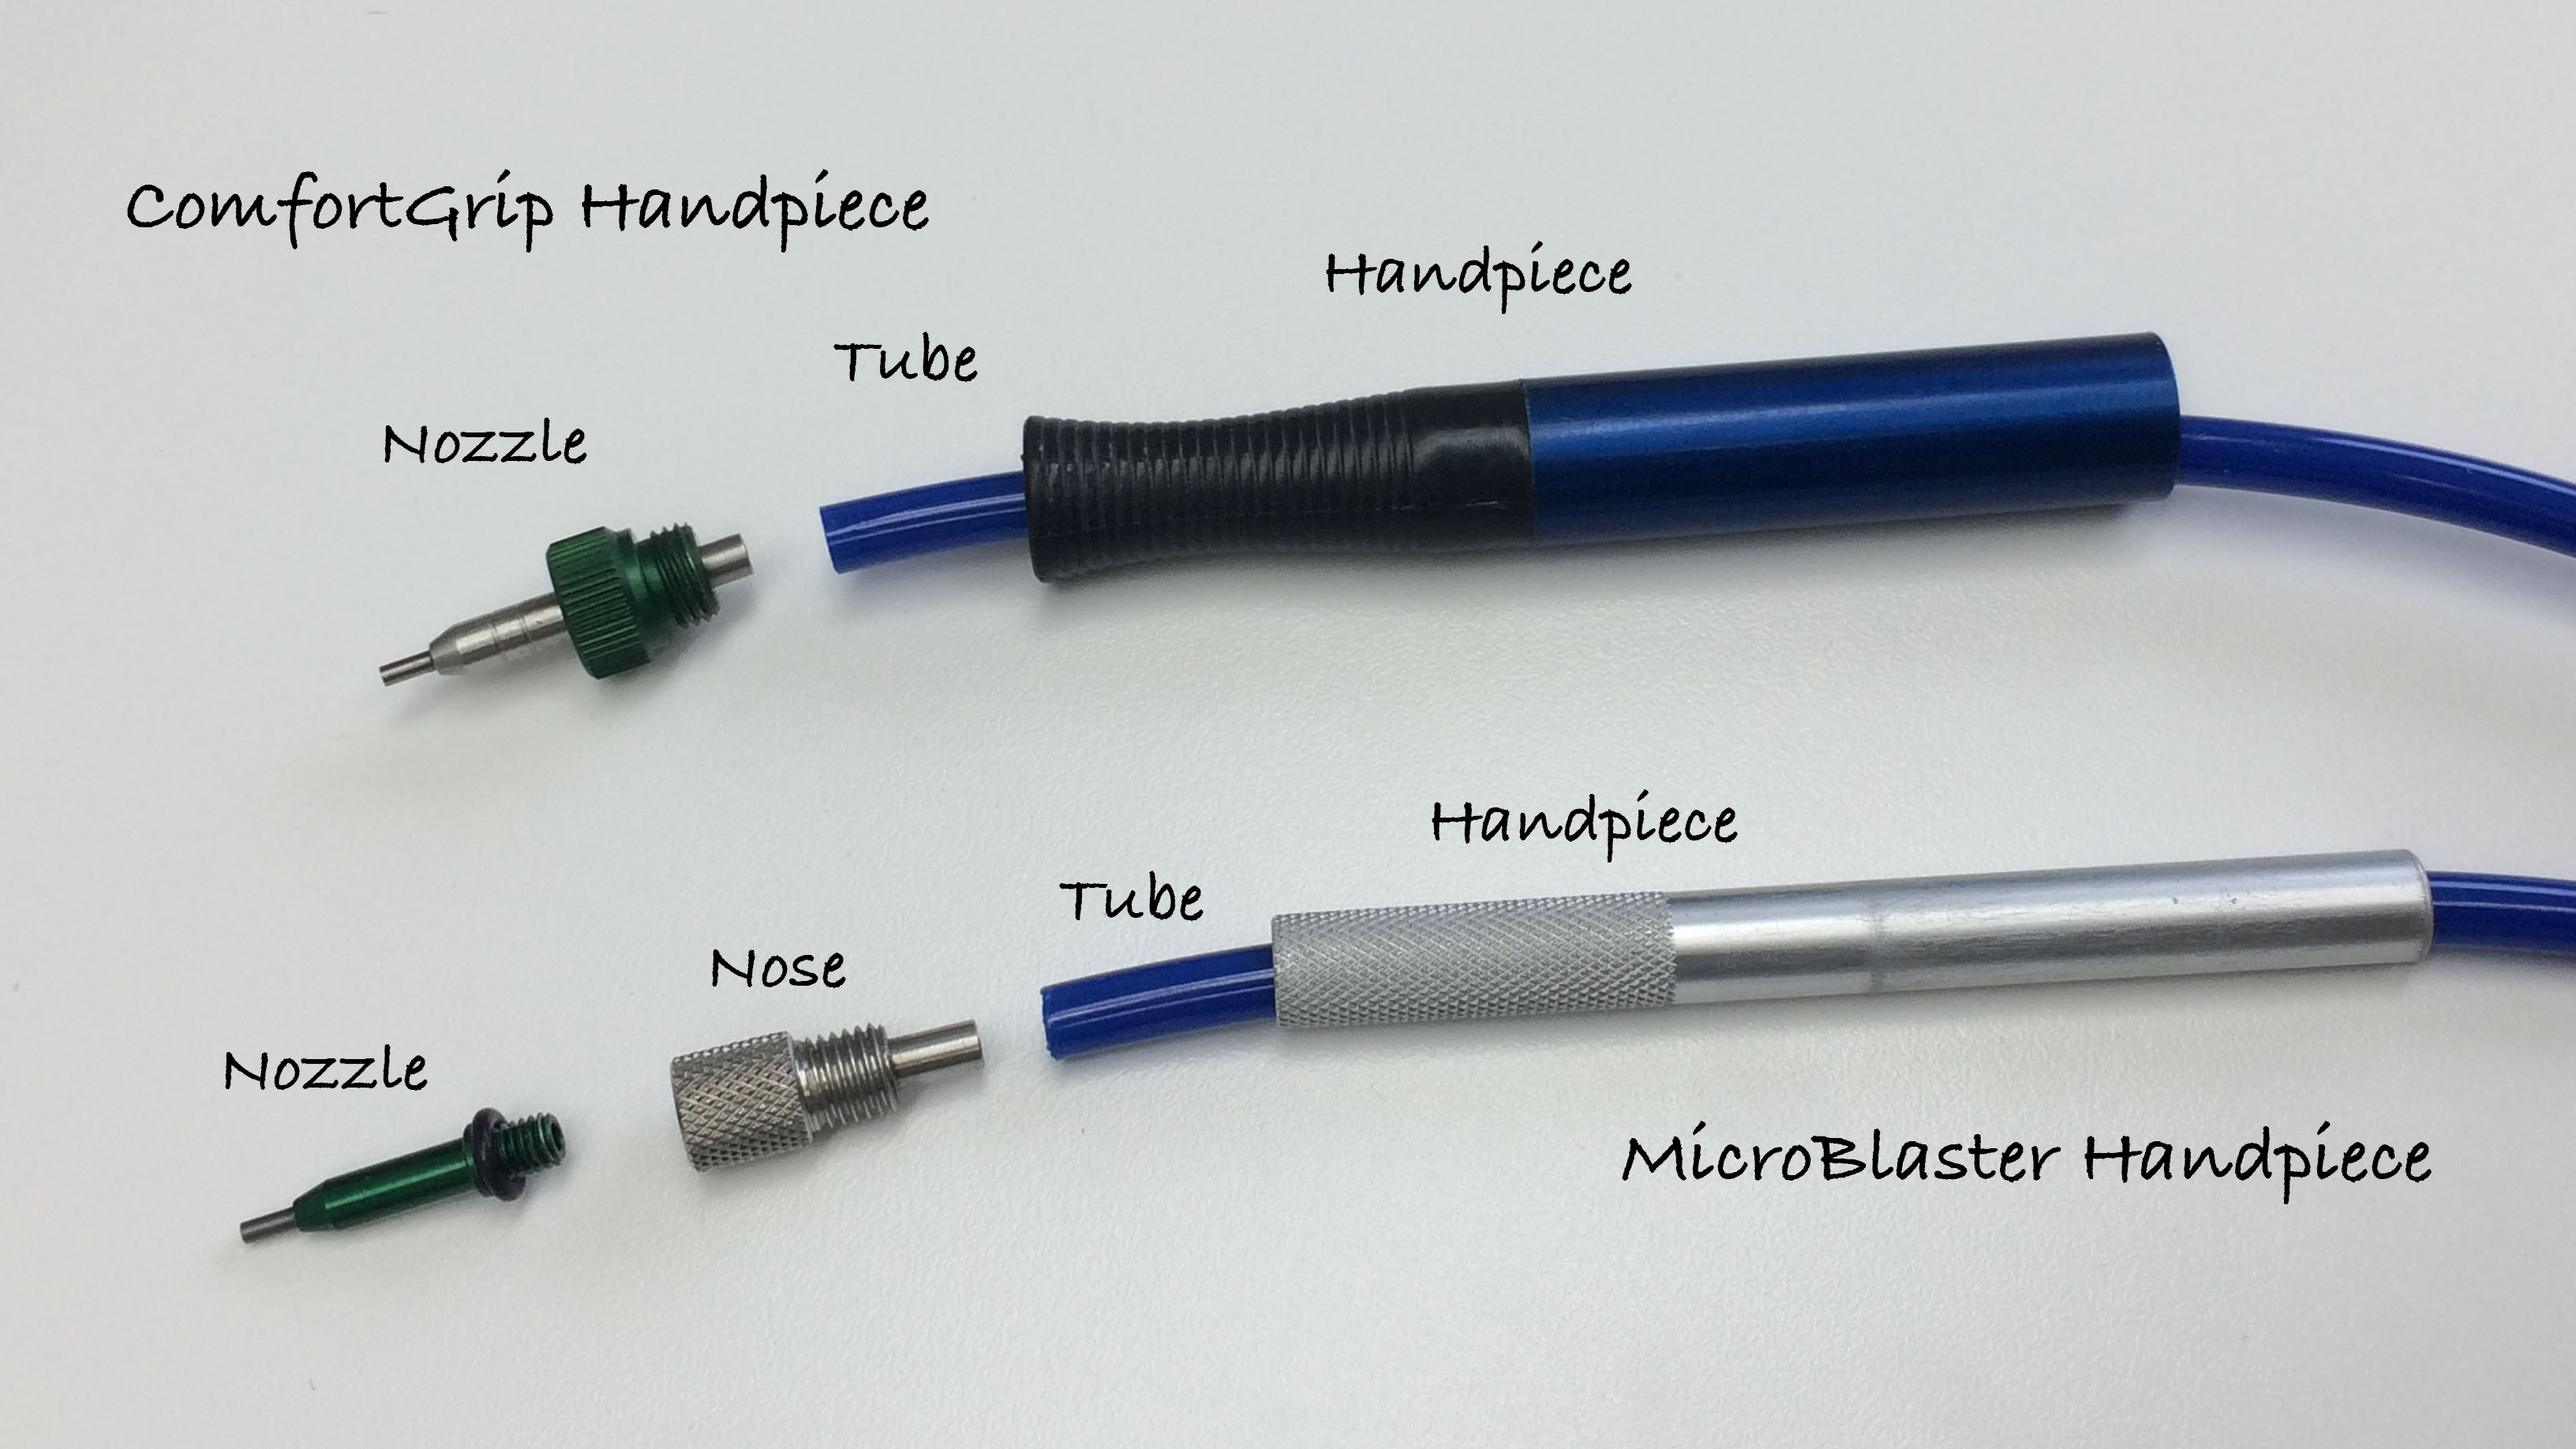 The MicroBlaster consists of a nozzle, nose and handpiece tube; the ComfortGrip handpiece consists of the nozzle and handpiece tube